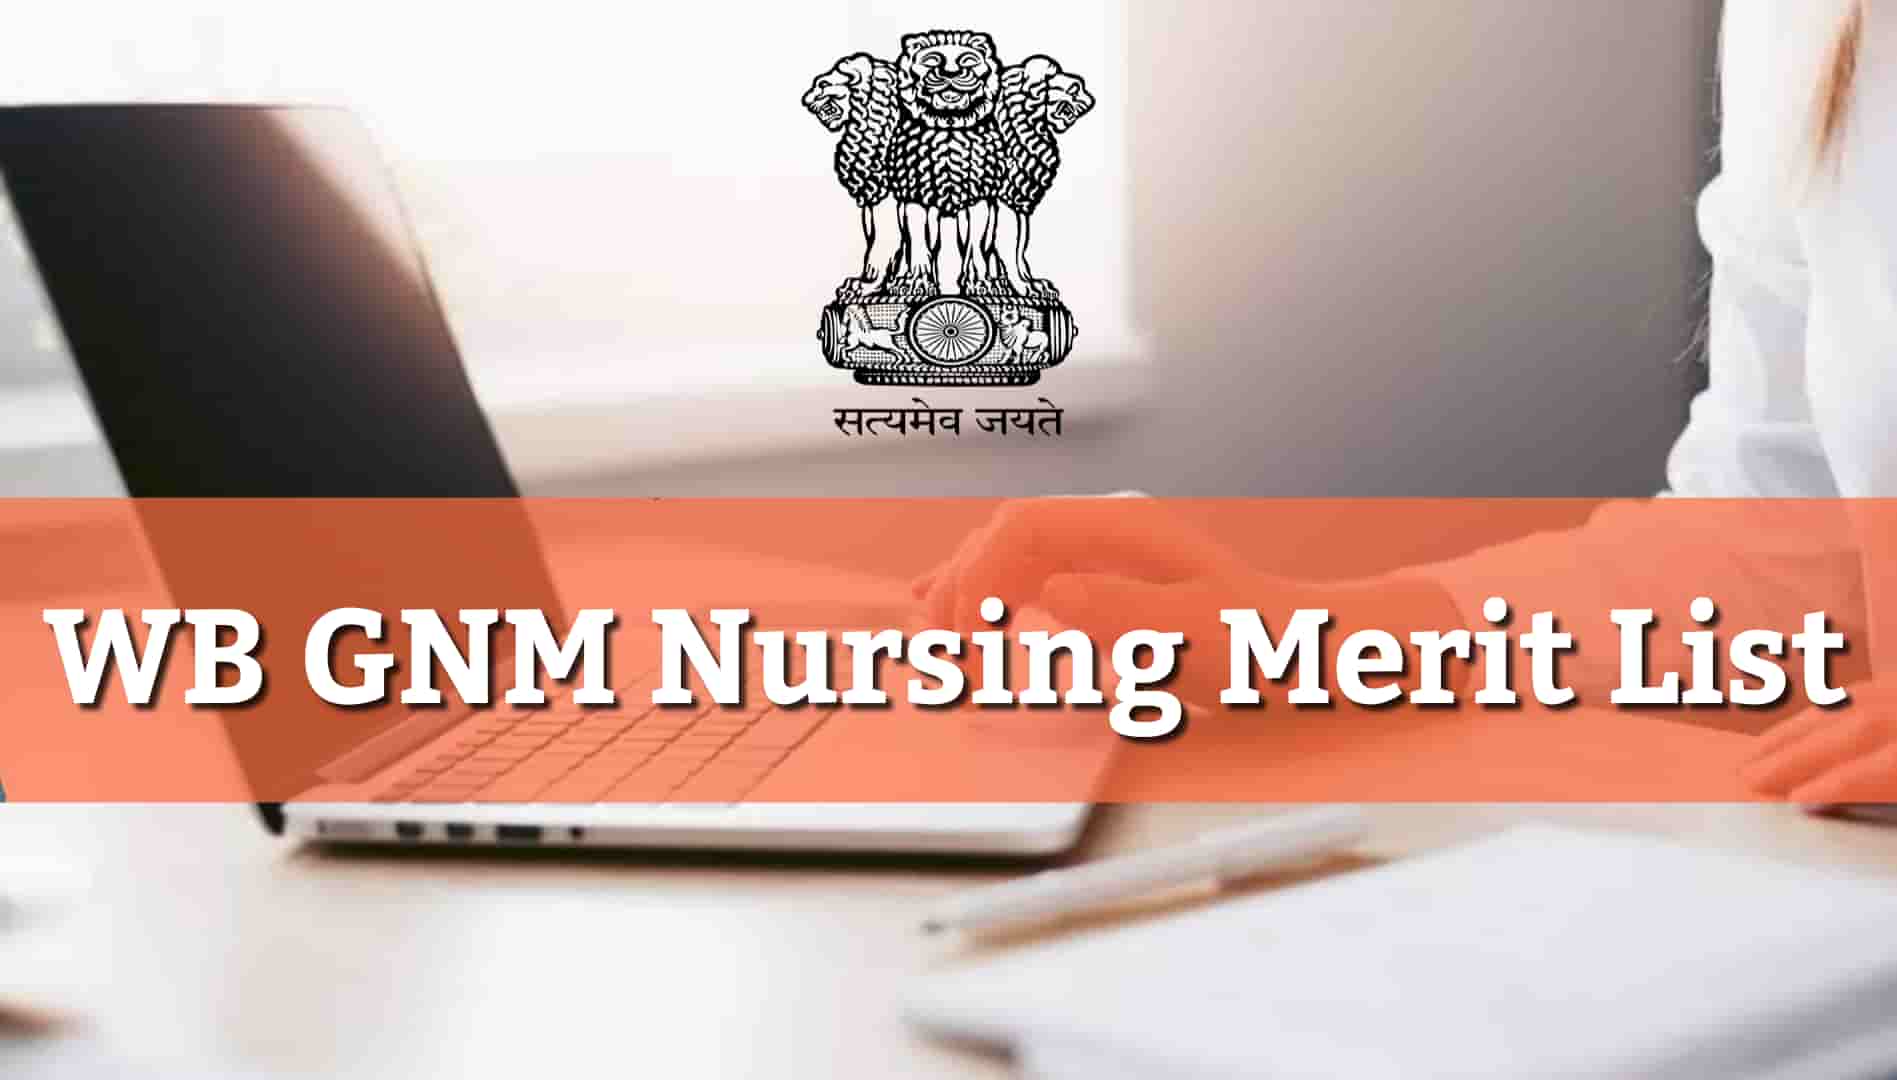 Wb GNM Merit List 2019 Counselling